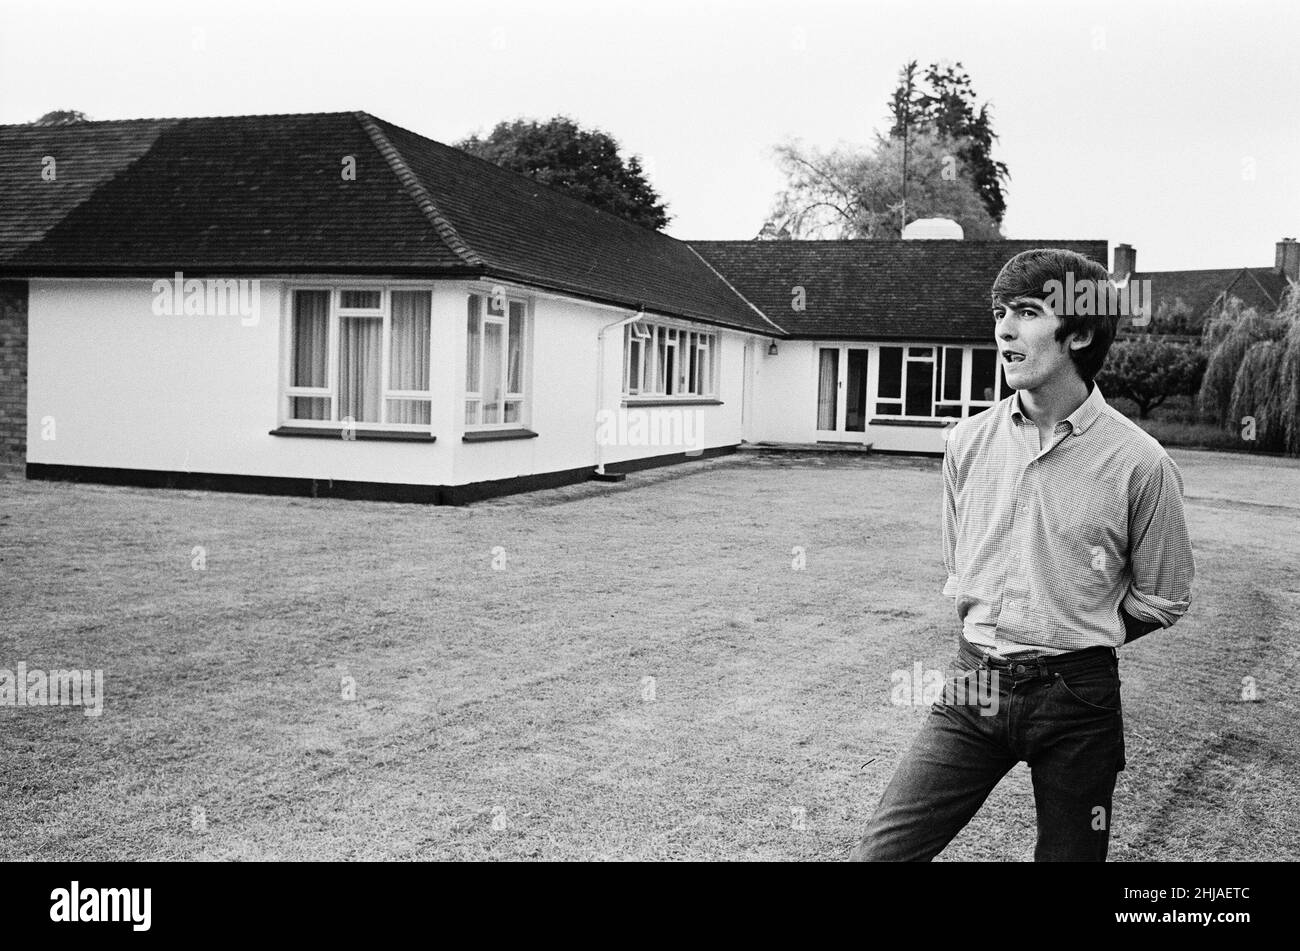 The Beatles George harrison at home in Esher 17th July 1964. *** Local Caption ***  -  - 13/05/2010 -  -  The house is called Kinfauns. George Harrison lived there until 1970, when he moved to Friar Park in Esher. Stock Photo